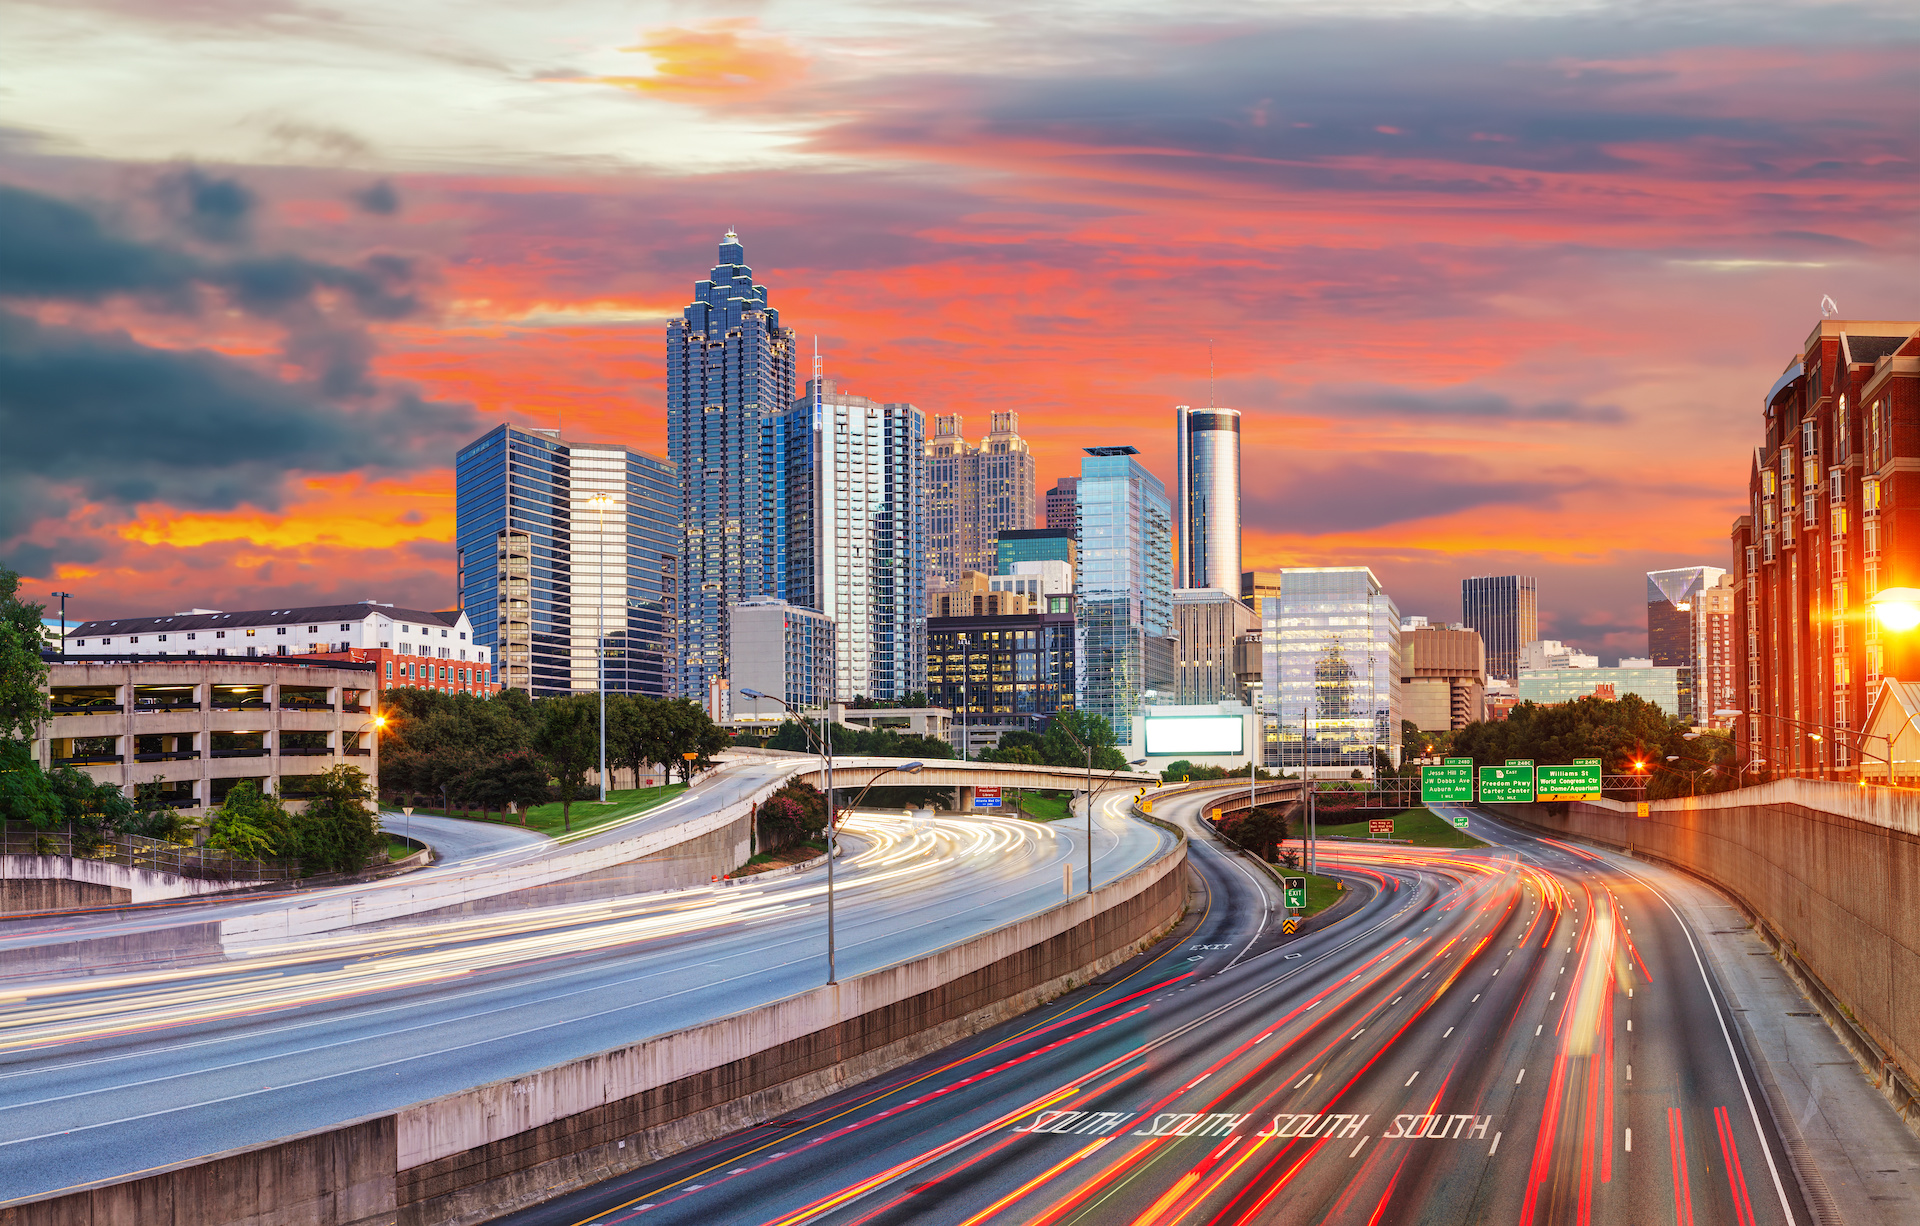 3 Factors To Look For in Your Atlanta Data Center Services